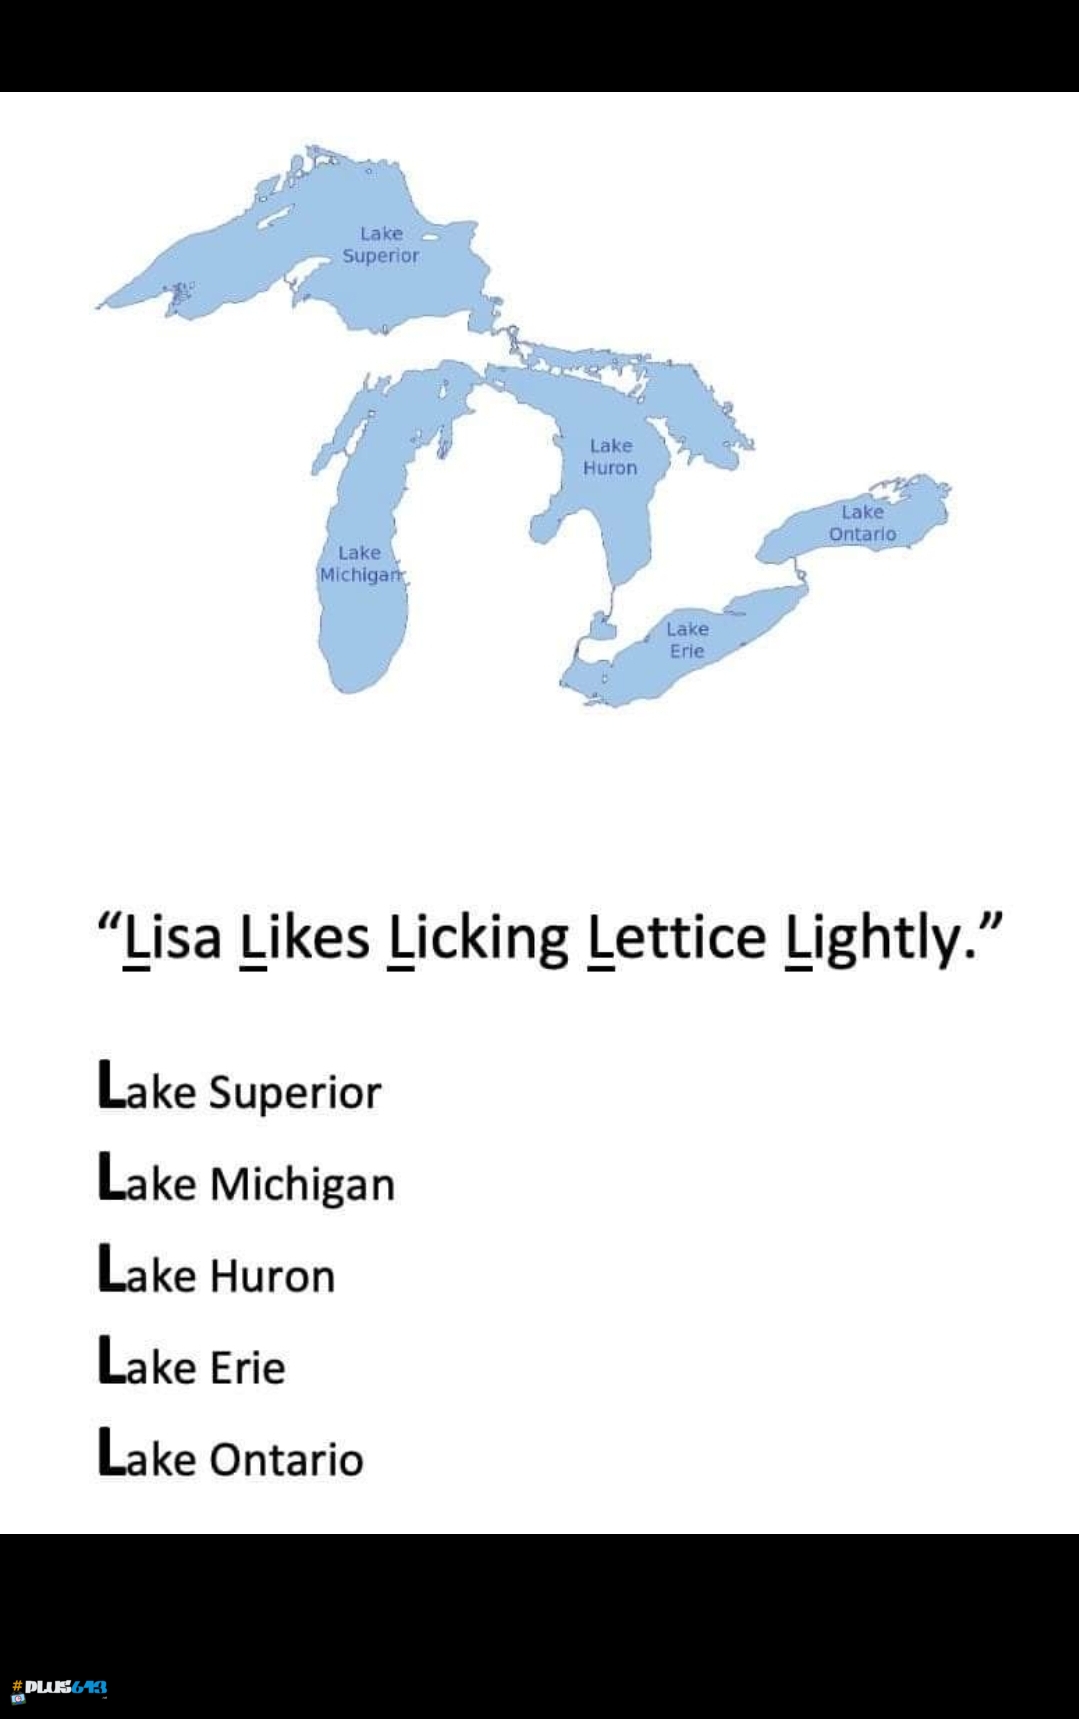 A handy guide for remembering the names of the great lakes 